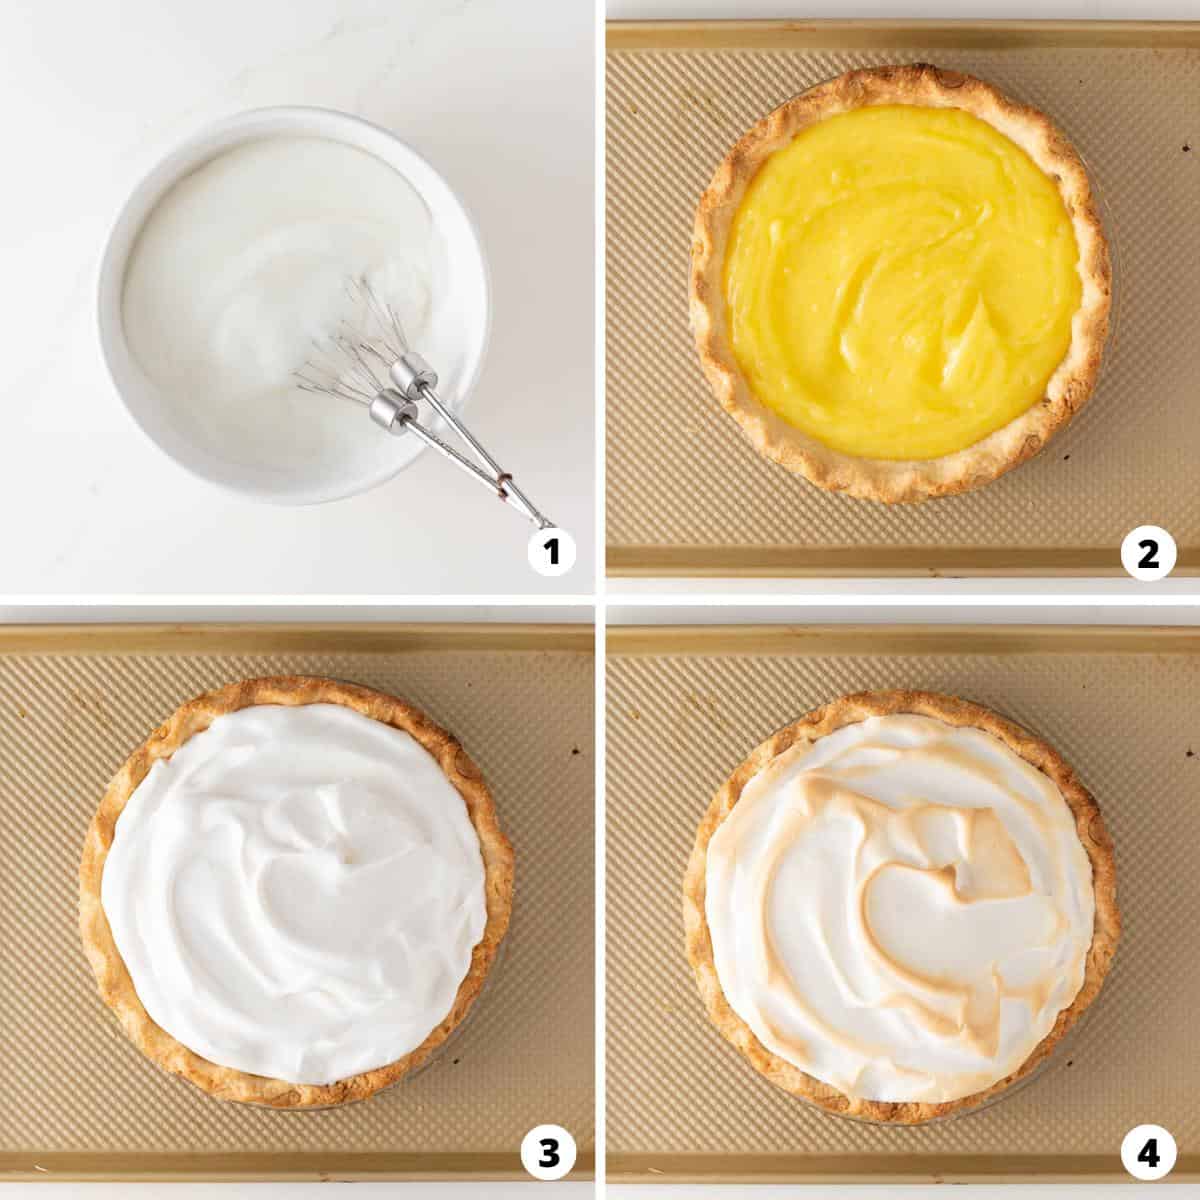 Showing how to make lemon meringue pie in a 4 step collage.